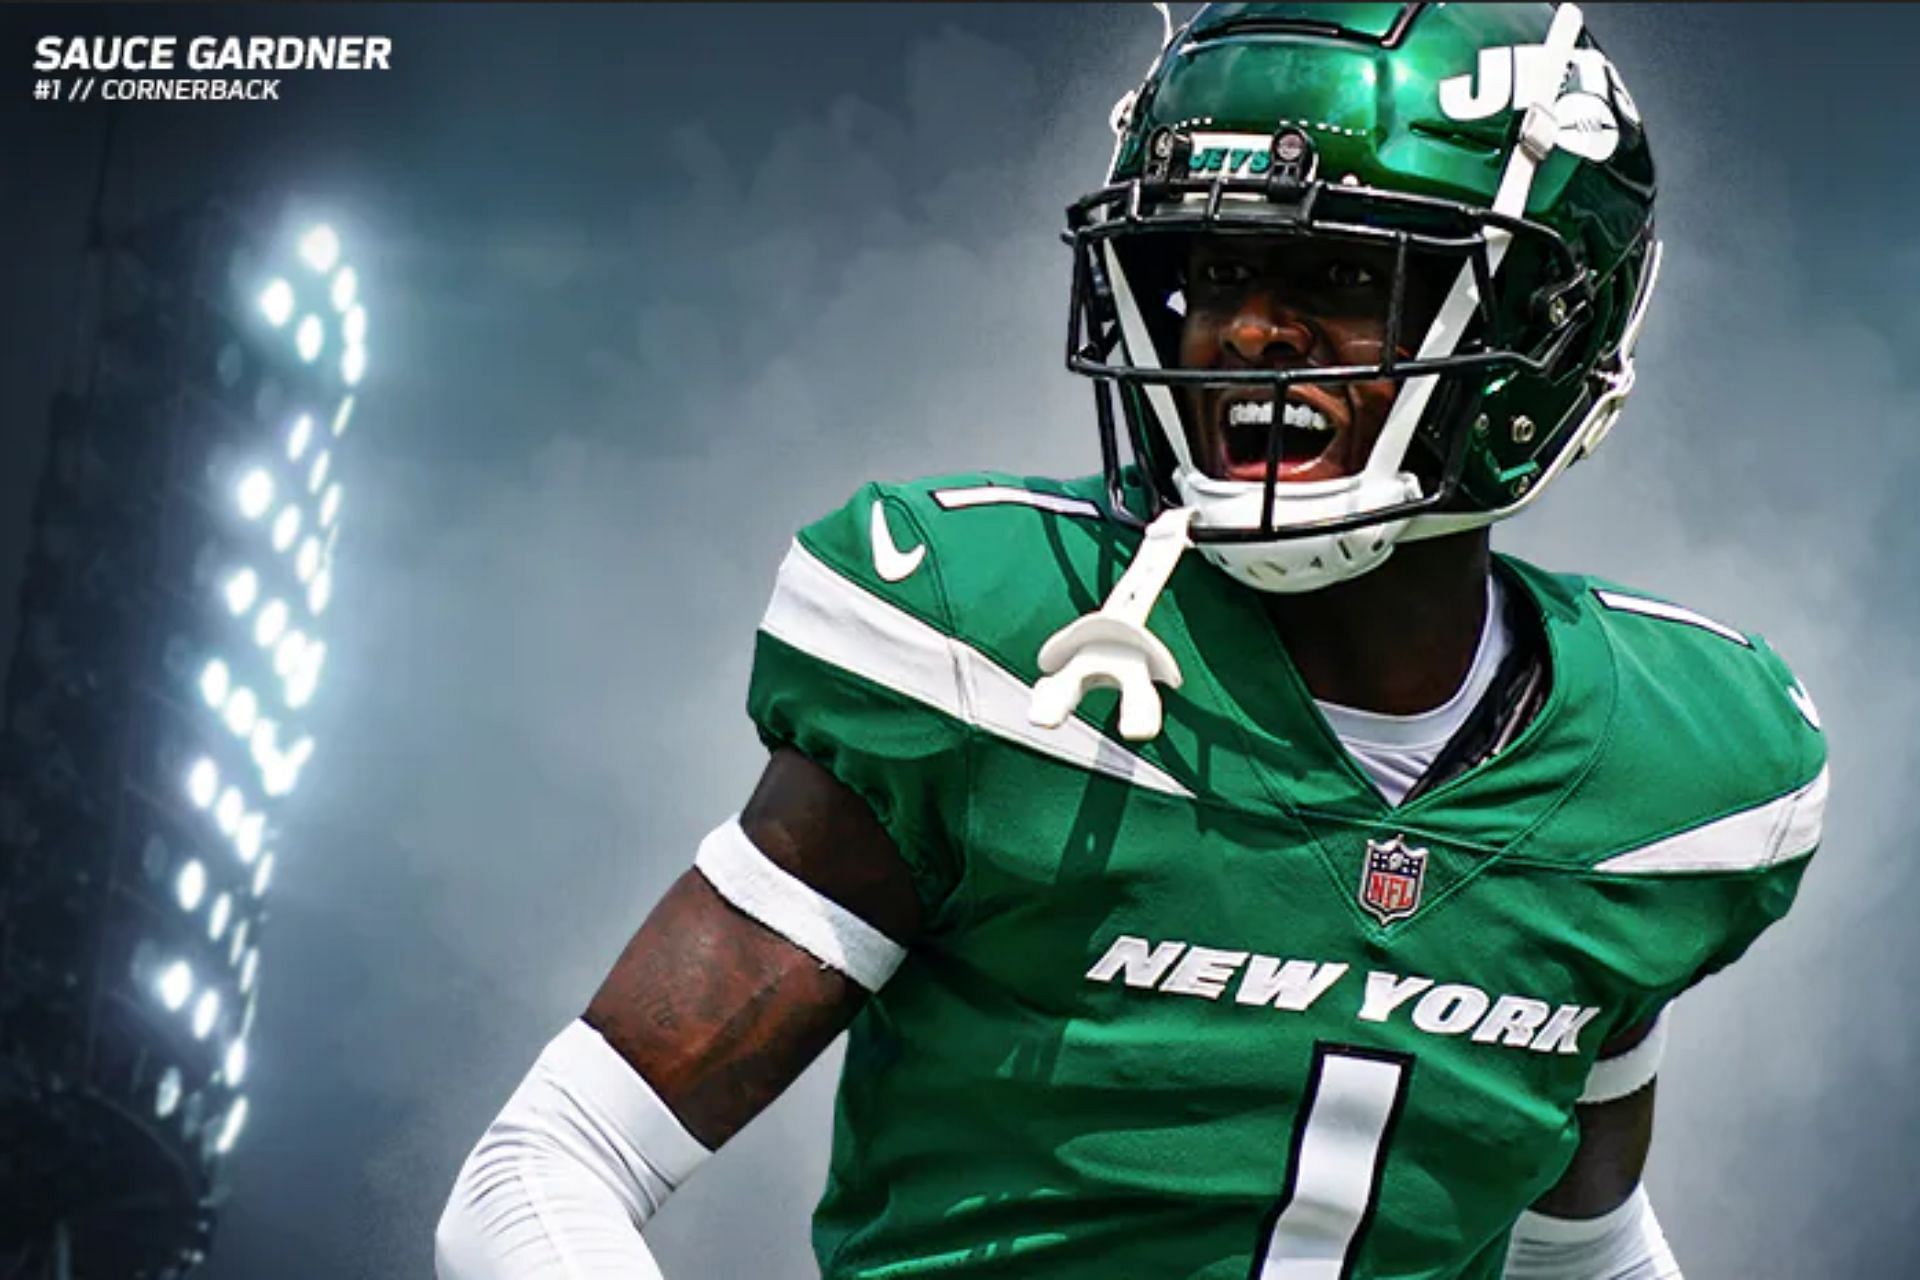 New York Jets 22/23 merch: Where to buy, price, and more explored